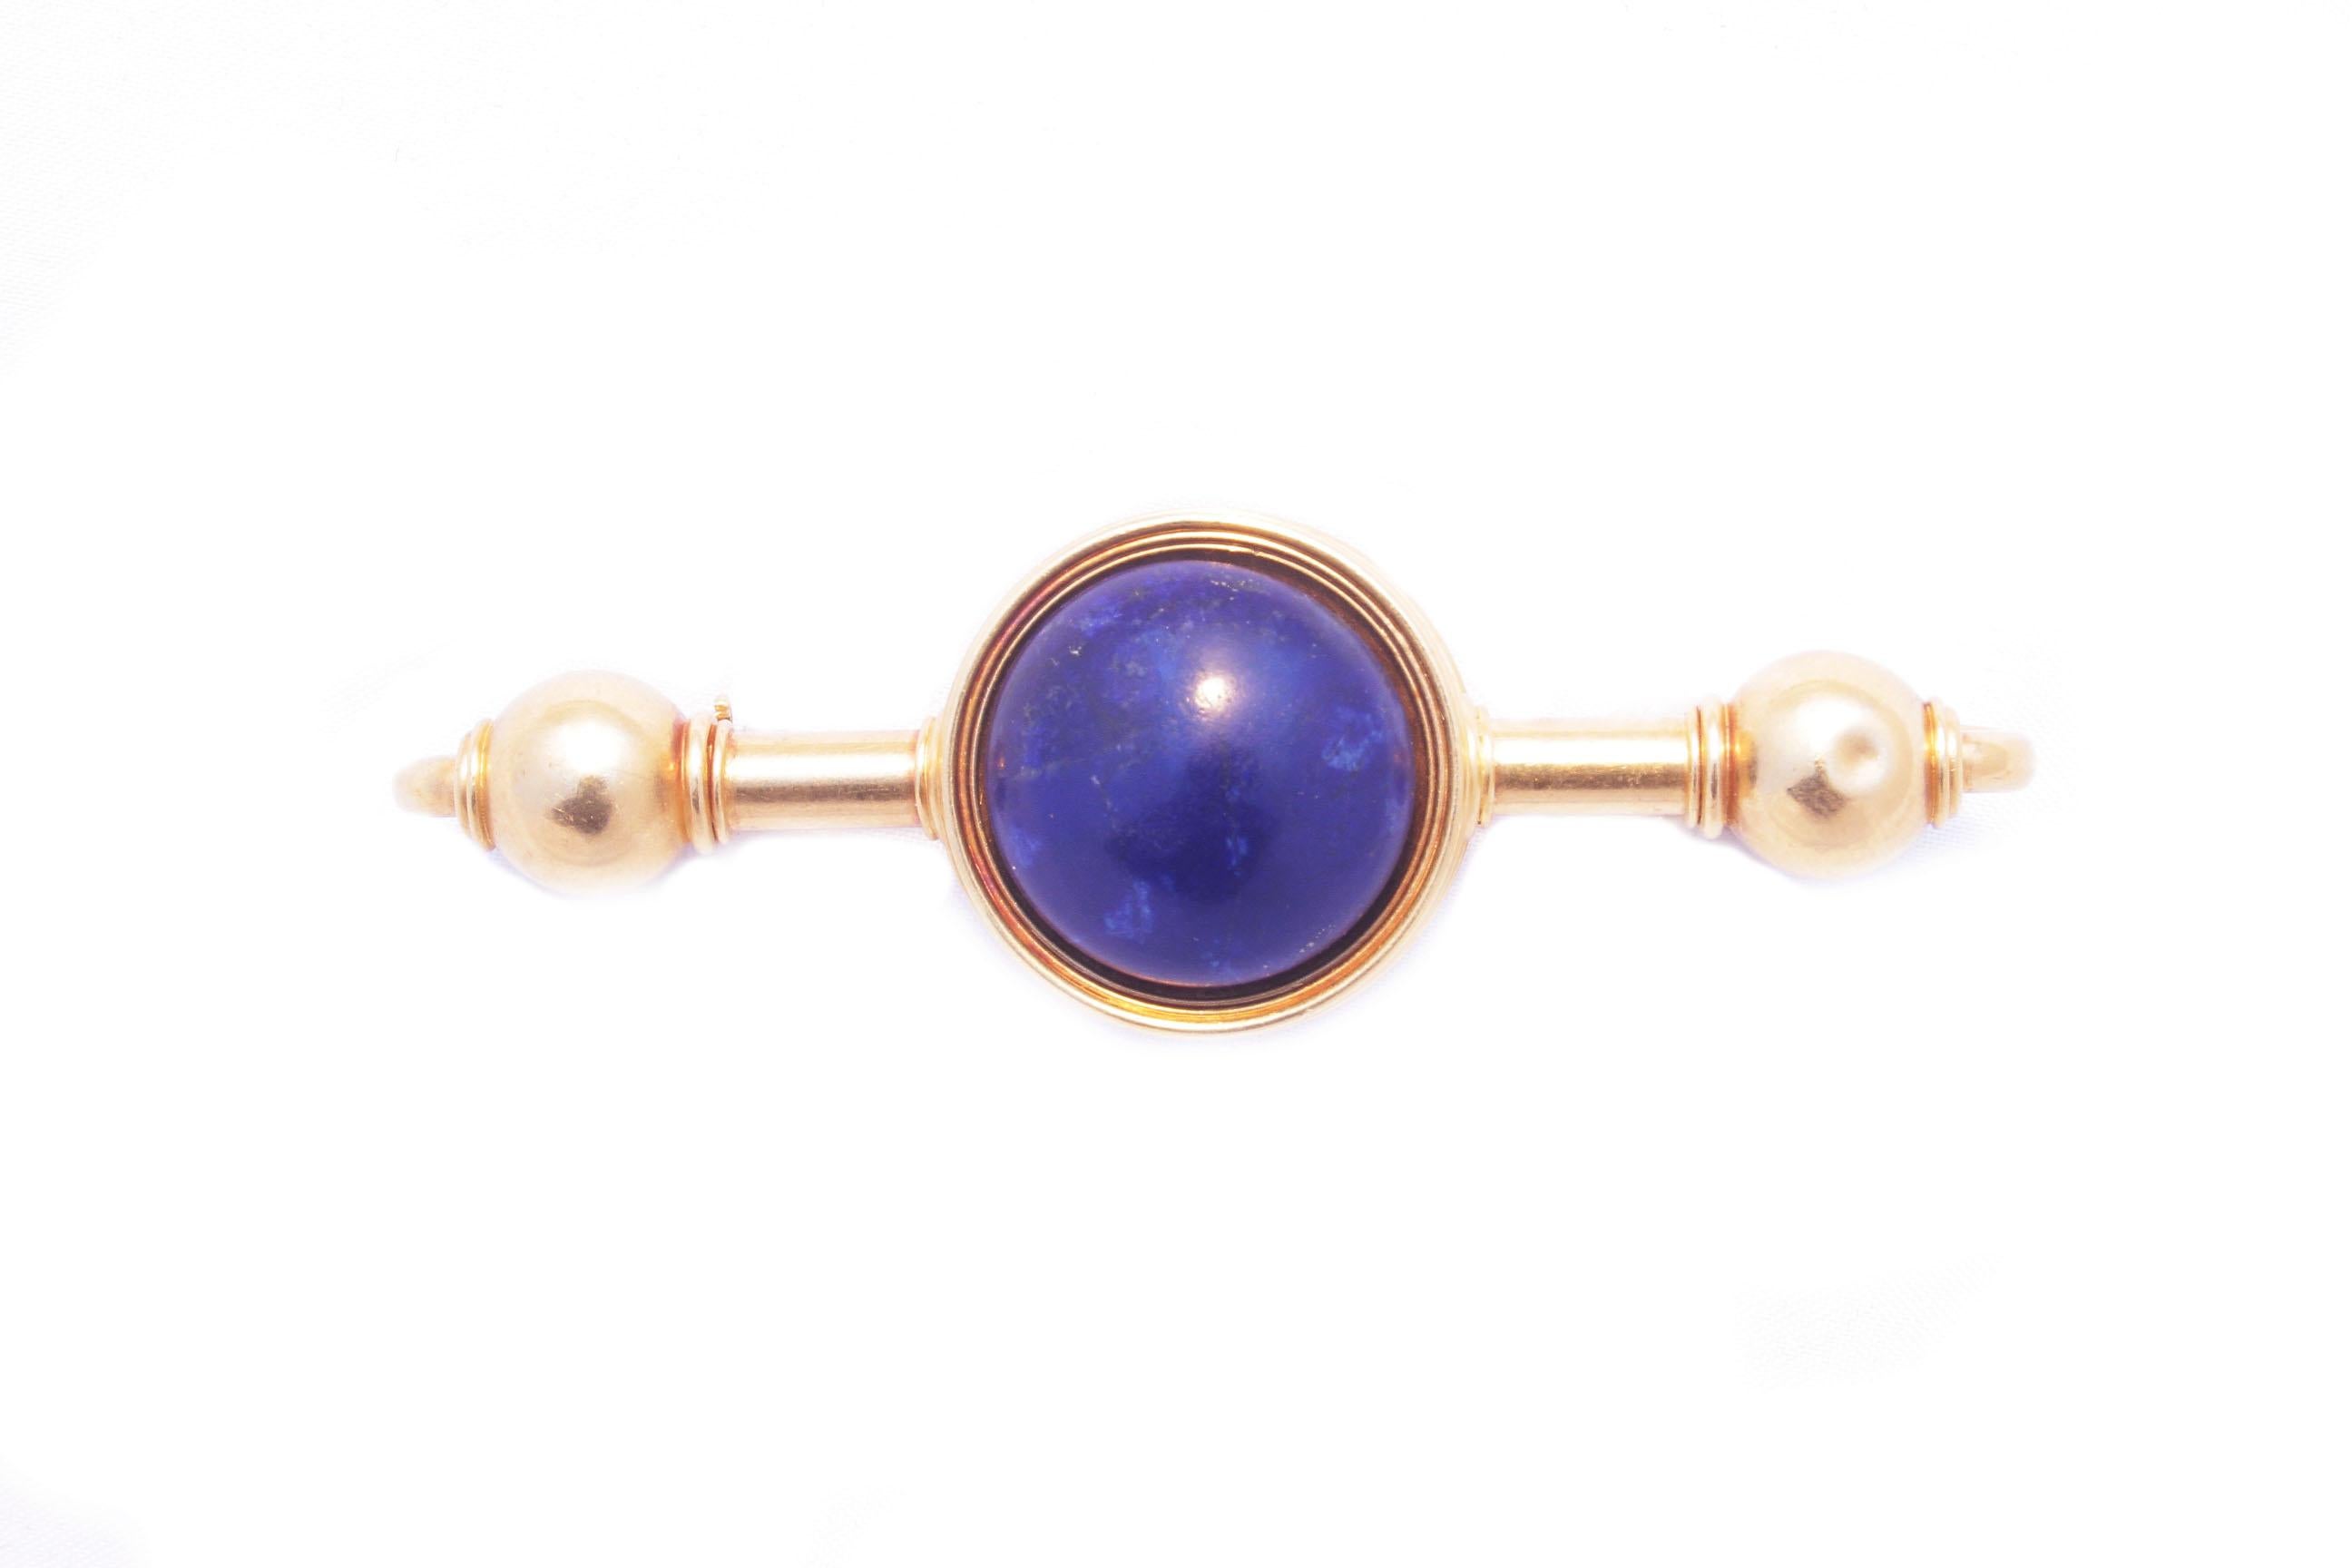 A beautiful antique brooch, manufactured by the historic Roman jeweller Travaglini, embellished by a large spherical lapis-lazuli element on a polished yellow gold mounting typical of the time, marked “ROMA”. Hallmarked Travaglini, mid 19th century.